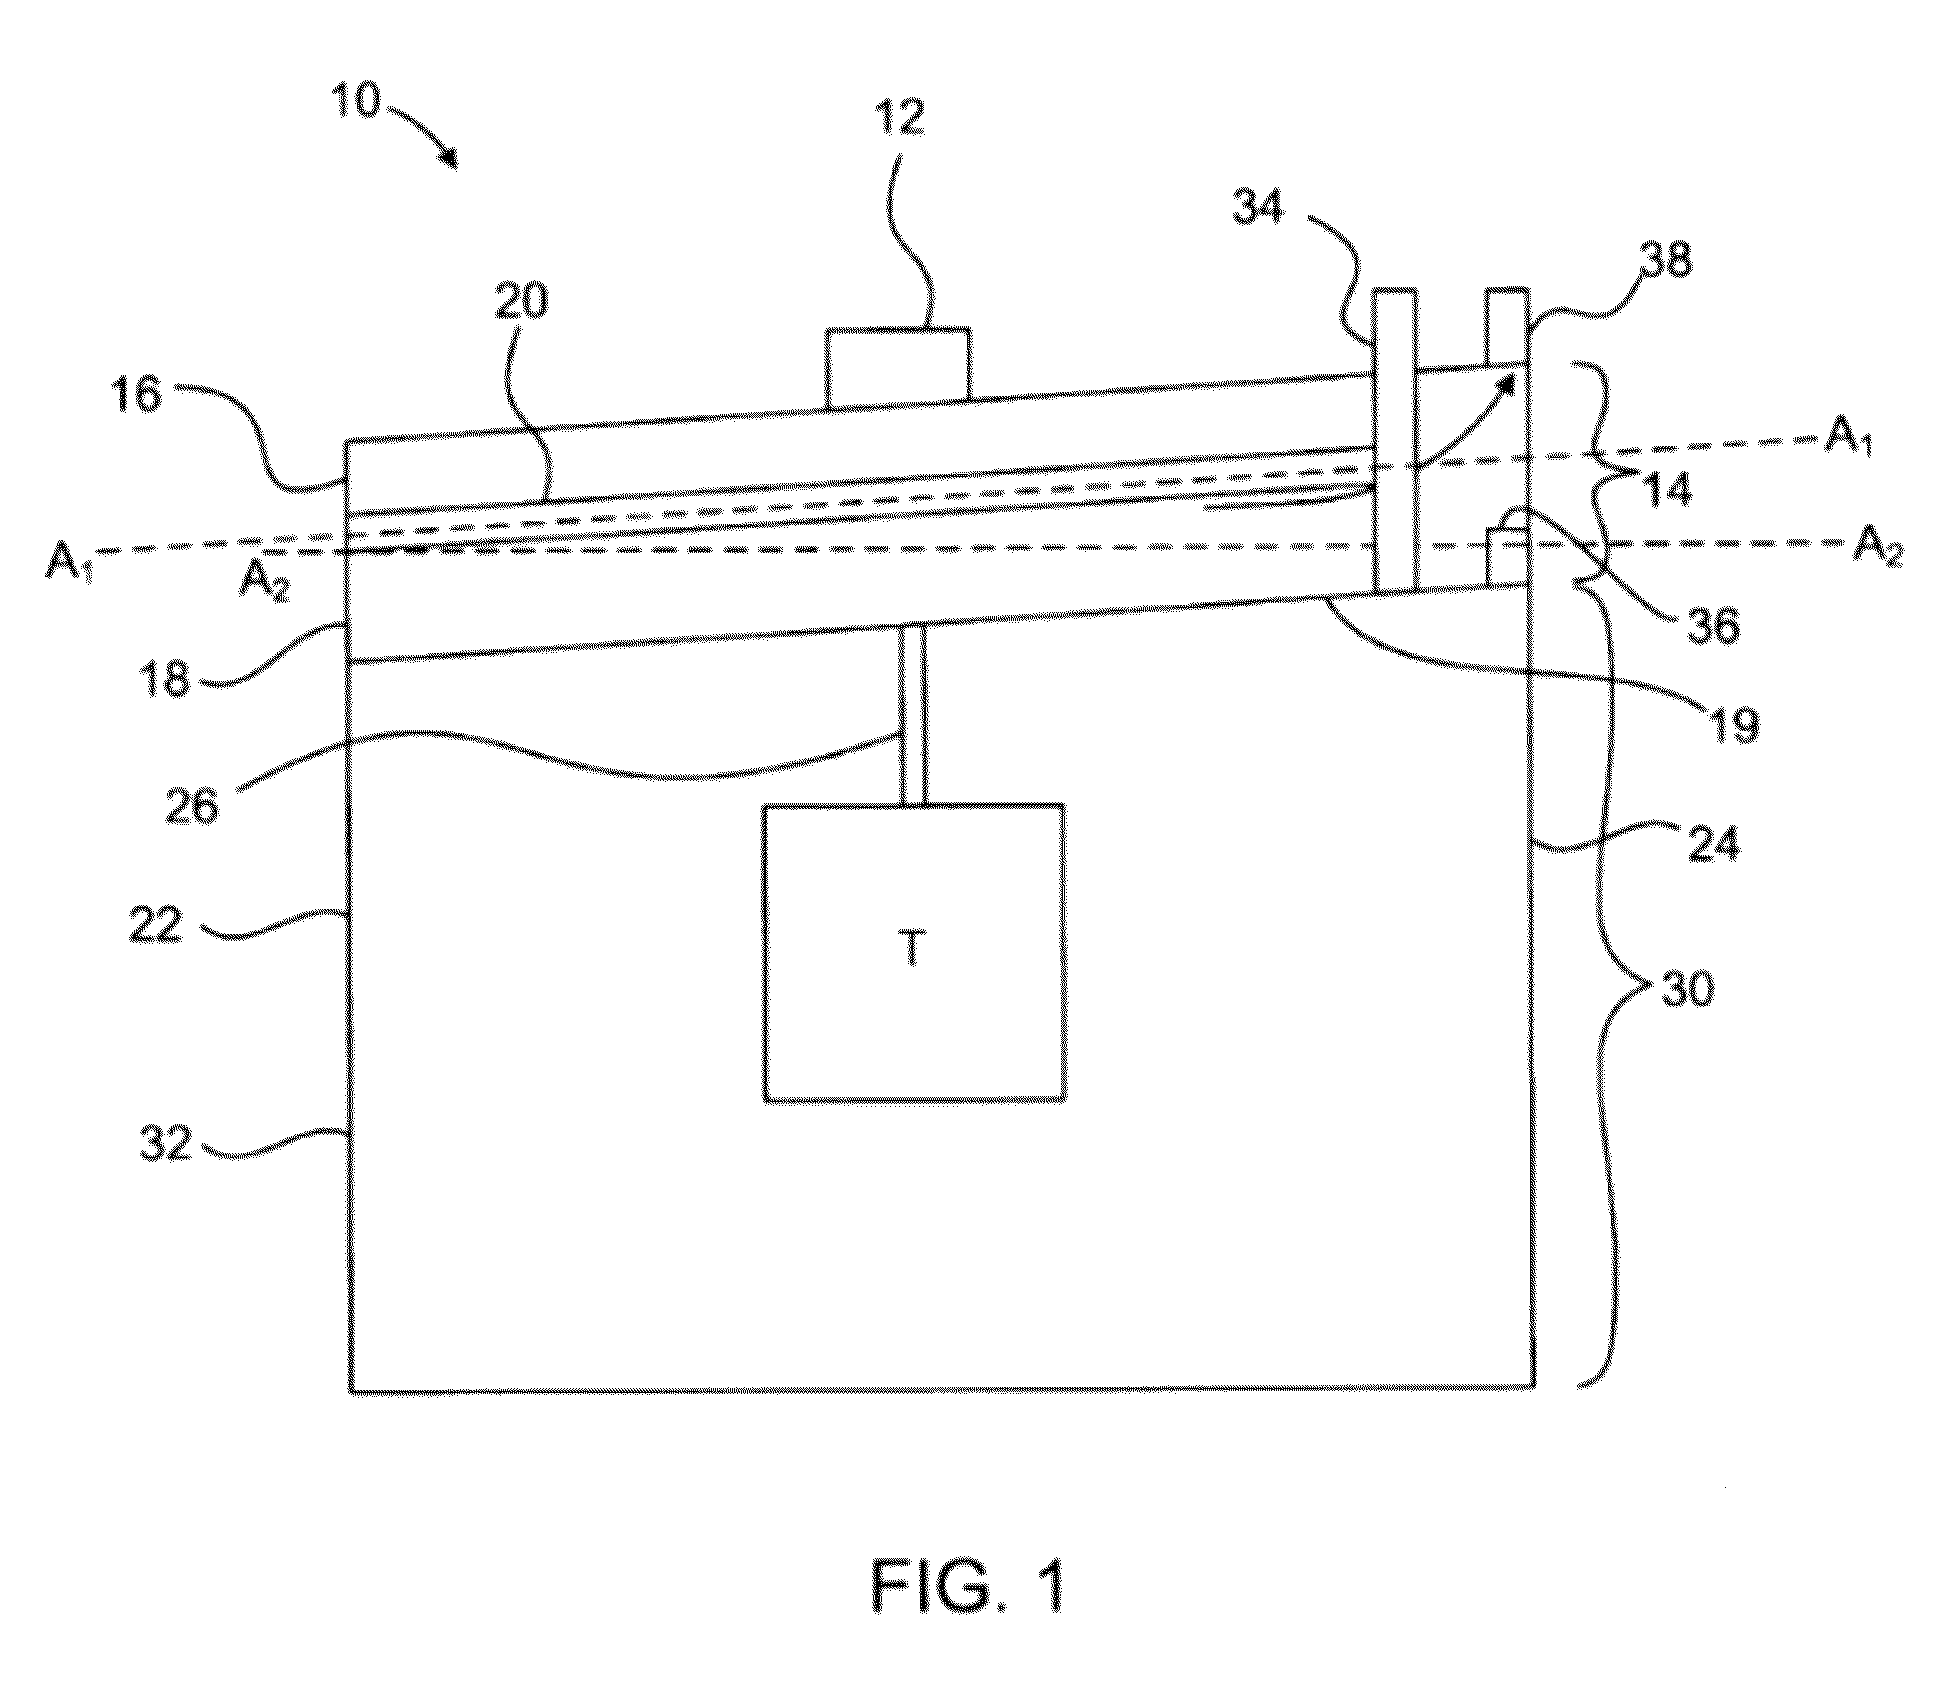 Apparatus for oxygenation and perfusion of tissue for organ preservation